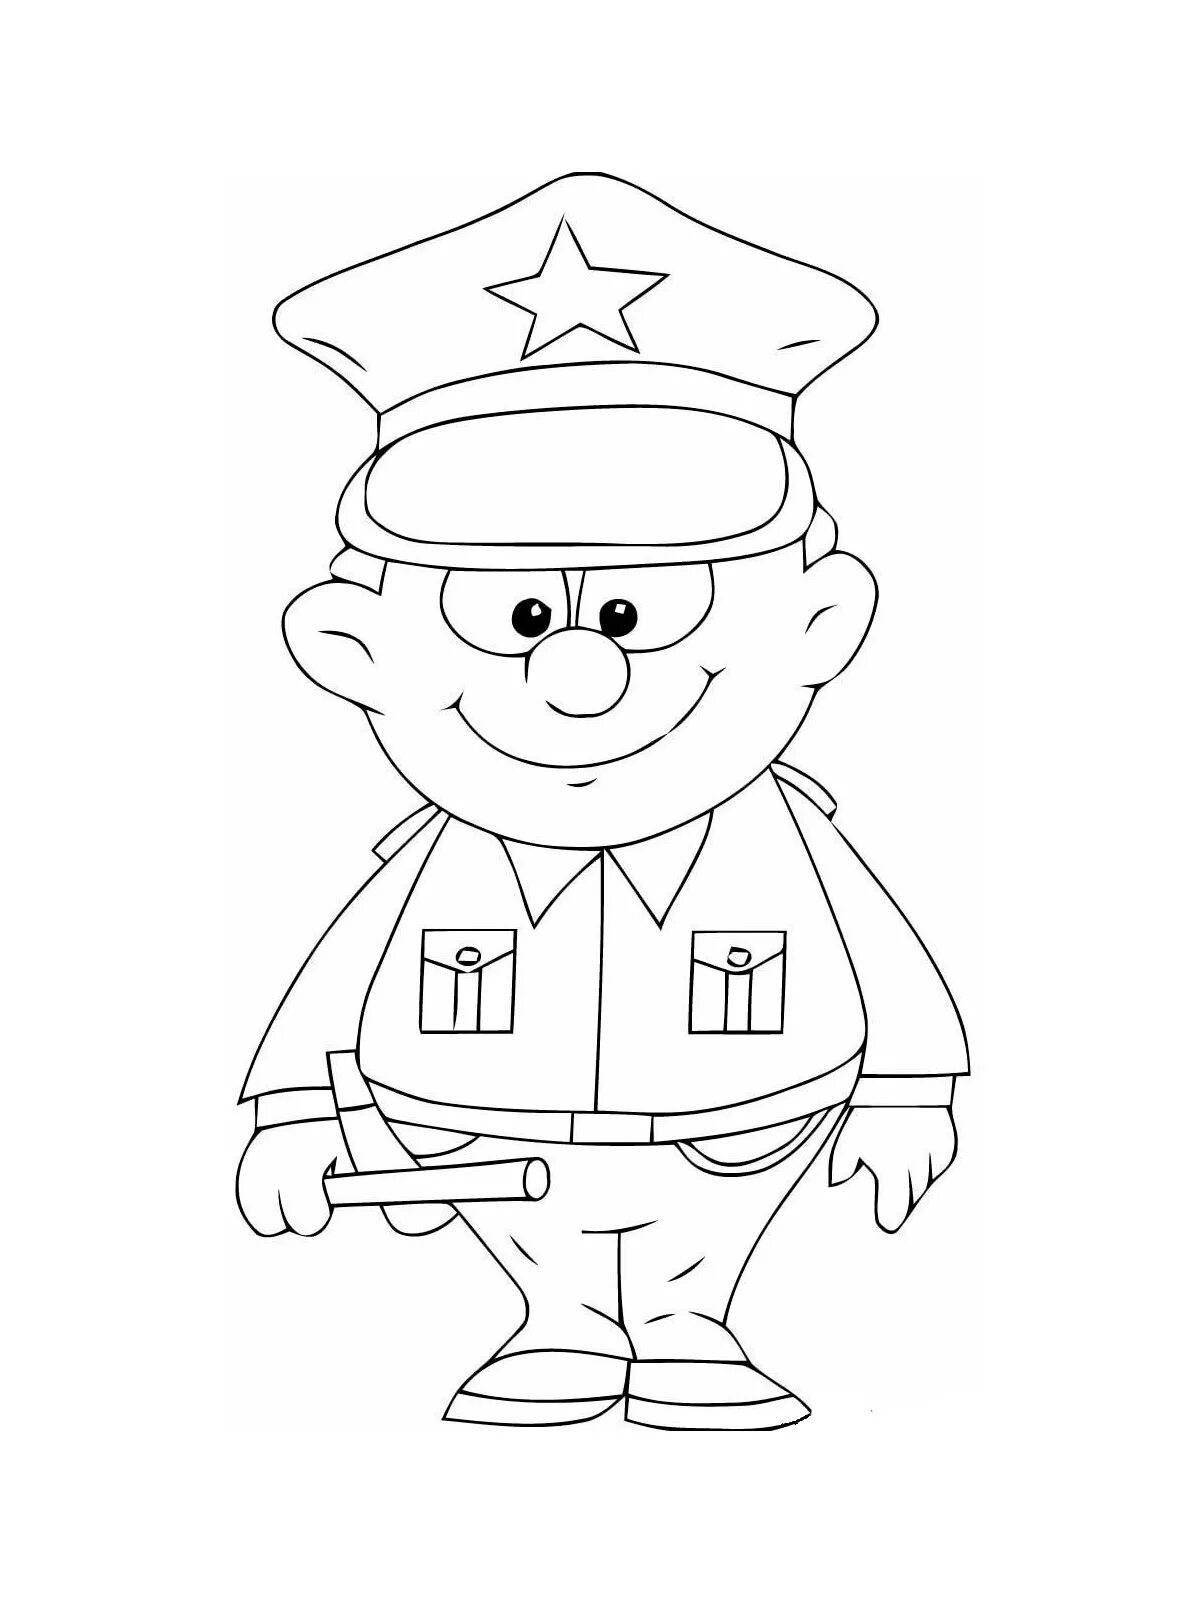 Coloring cute police profession